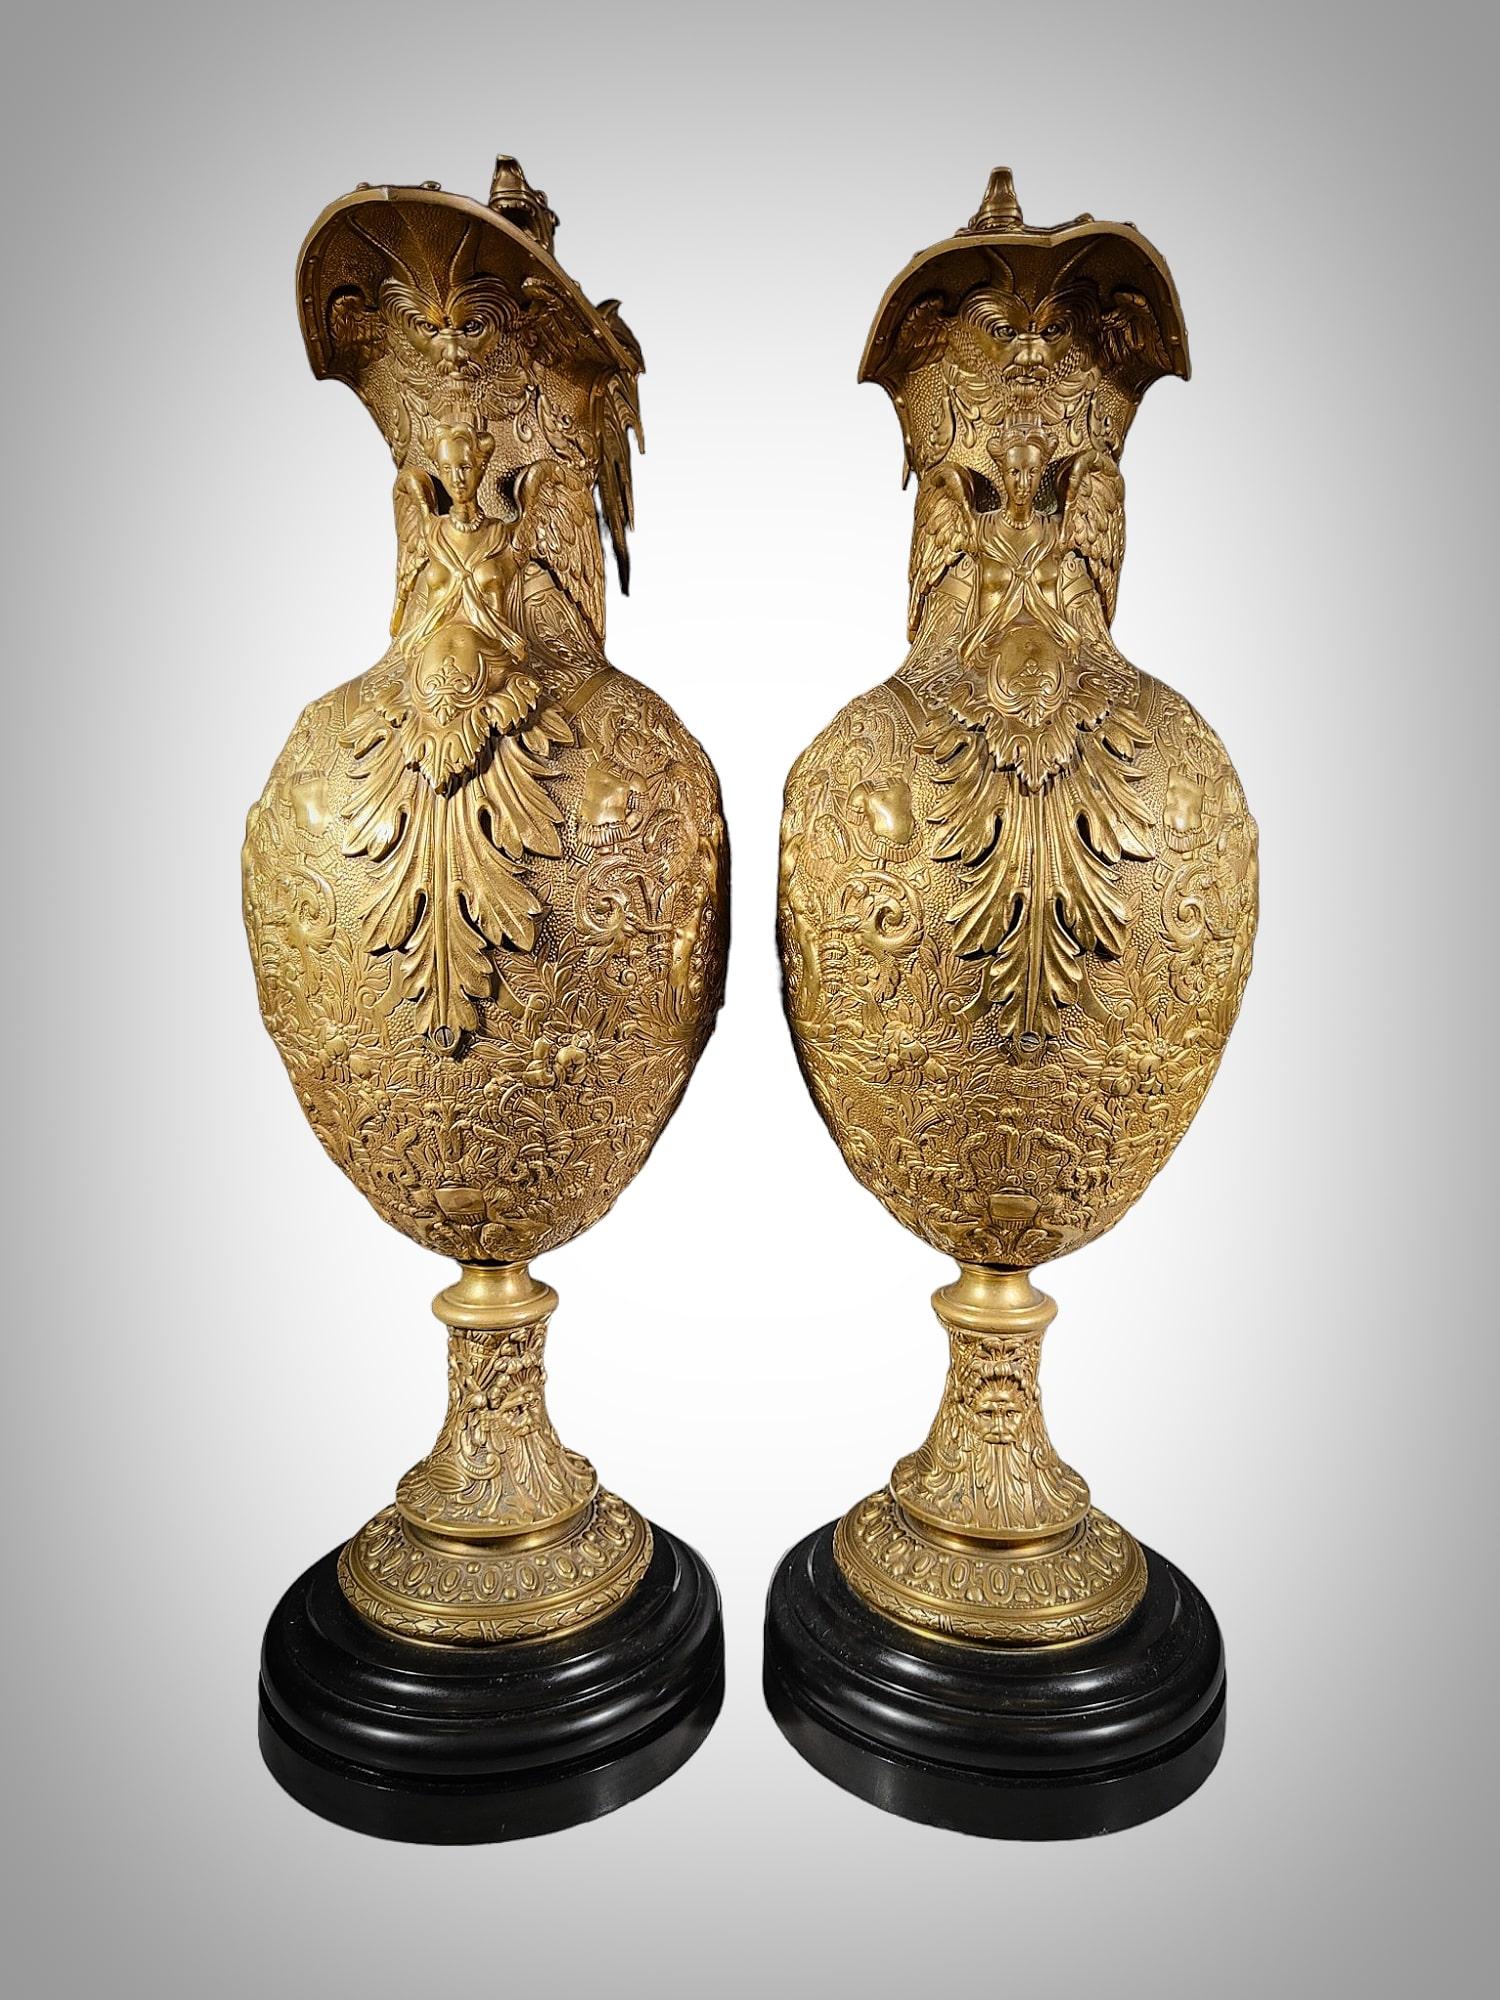 Magnificent Gilded Bronze Vases from the 19th Century For Sale 2